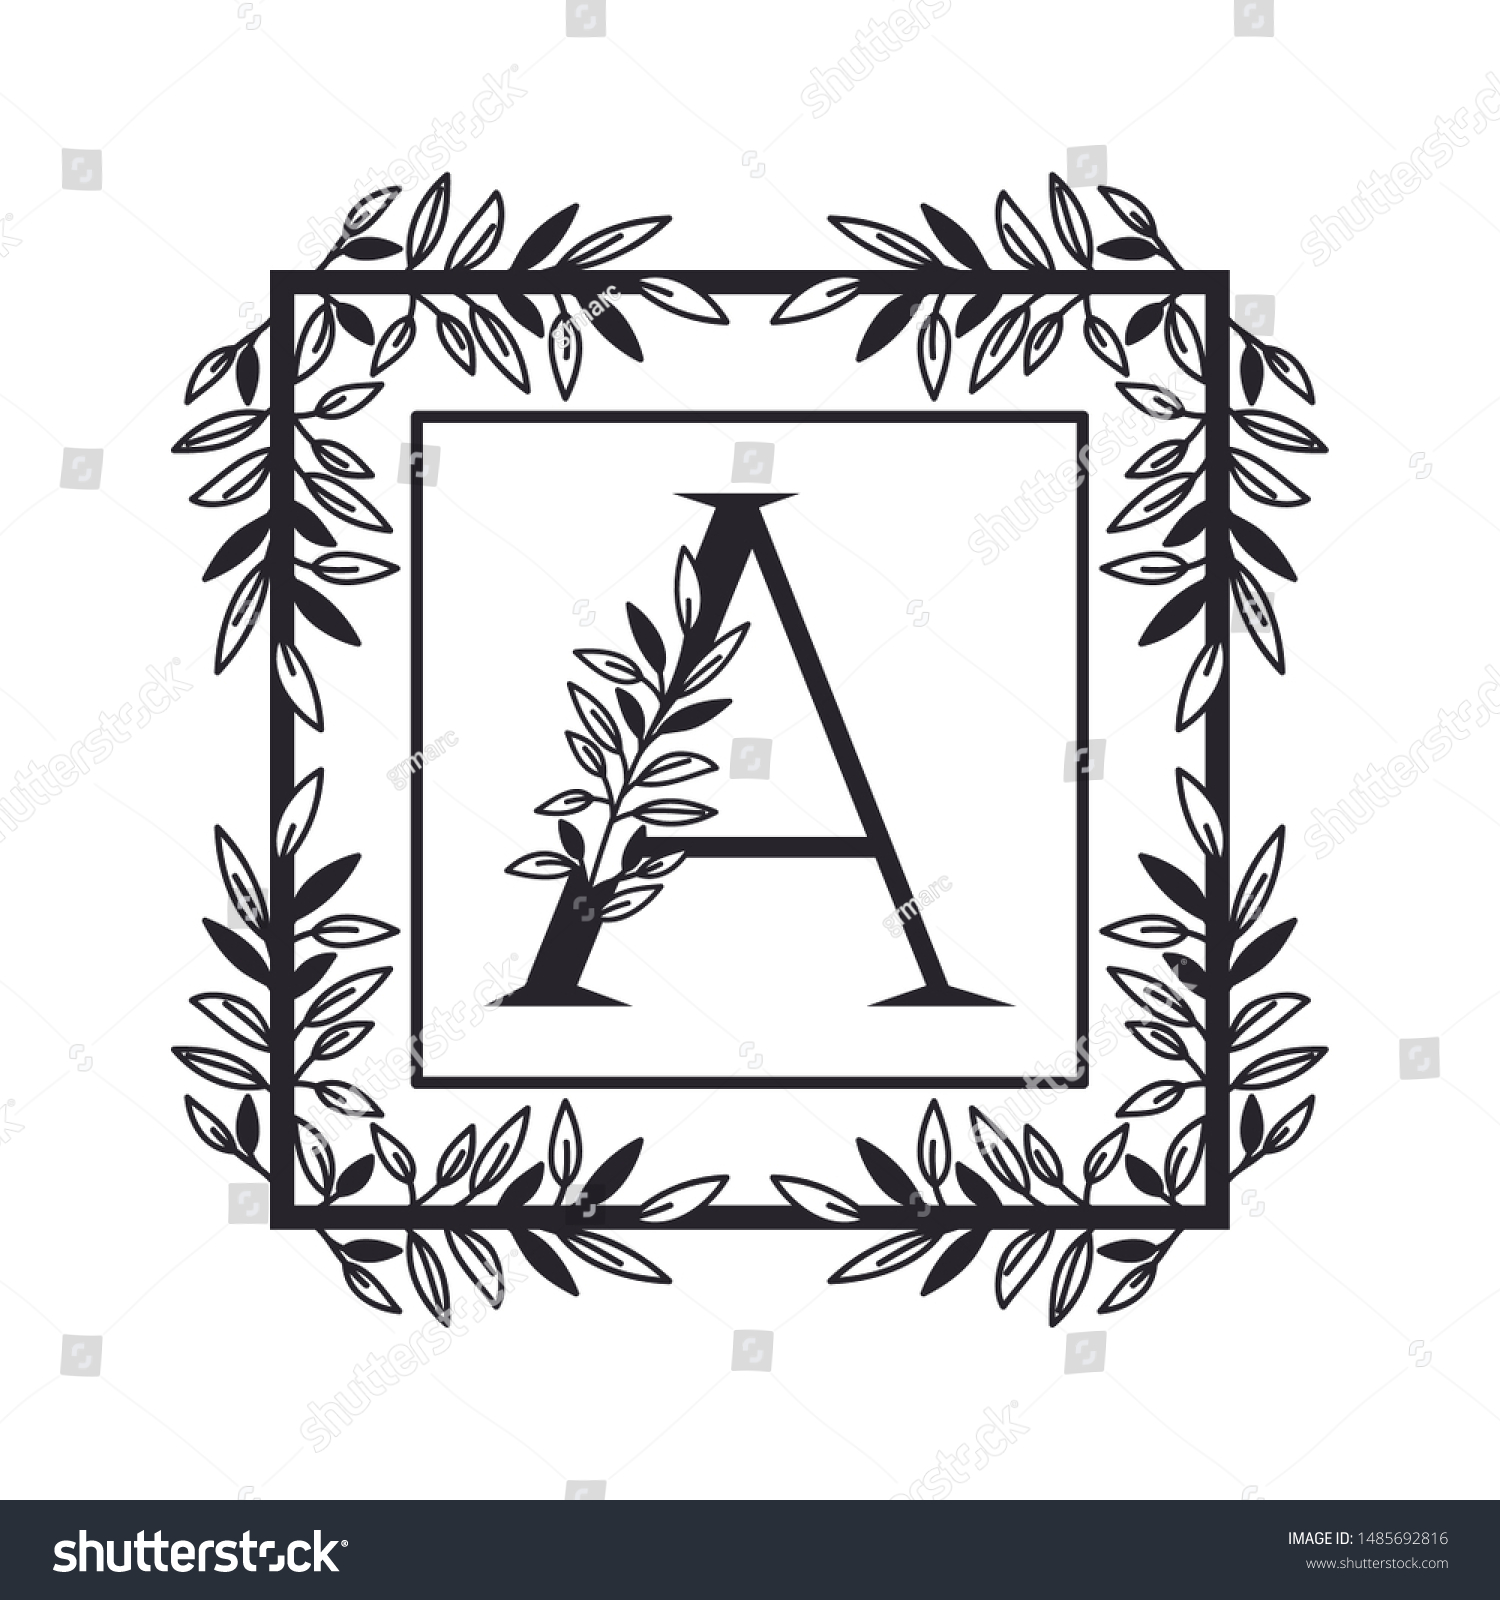 letter A of the alphabet with vintage style - Royalty Free Stock Vector ...